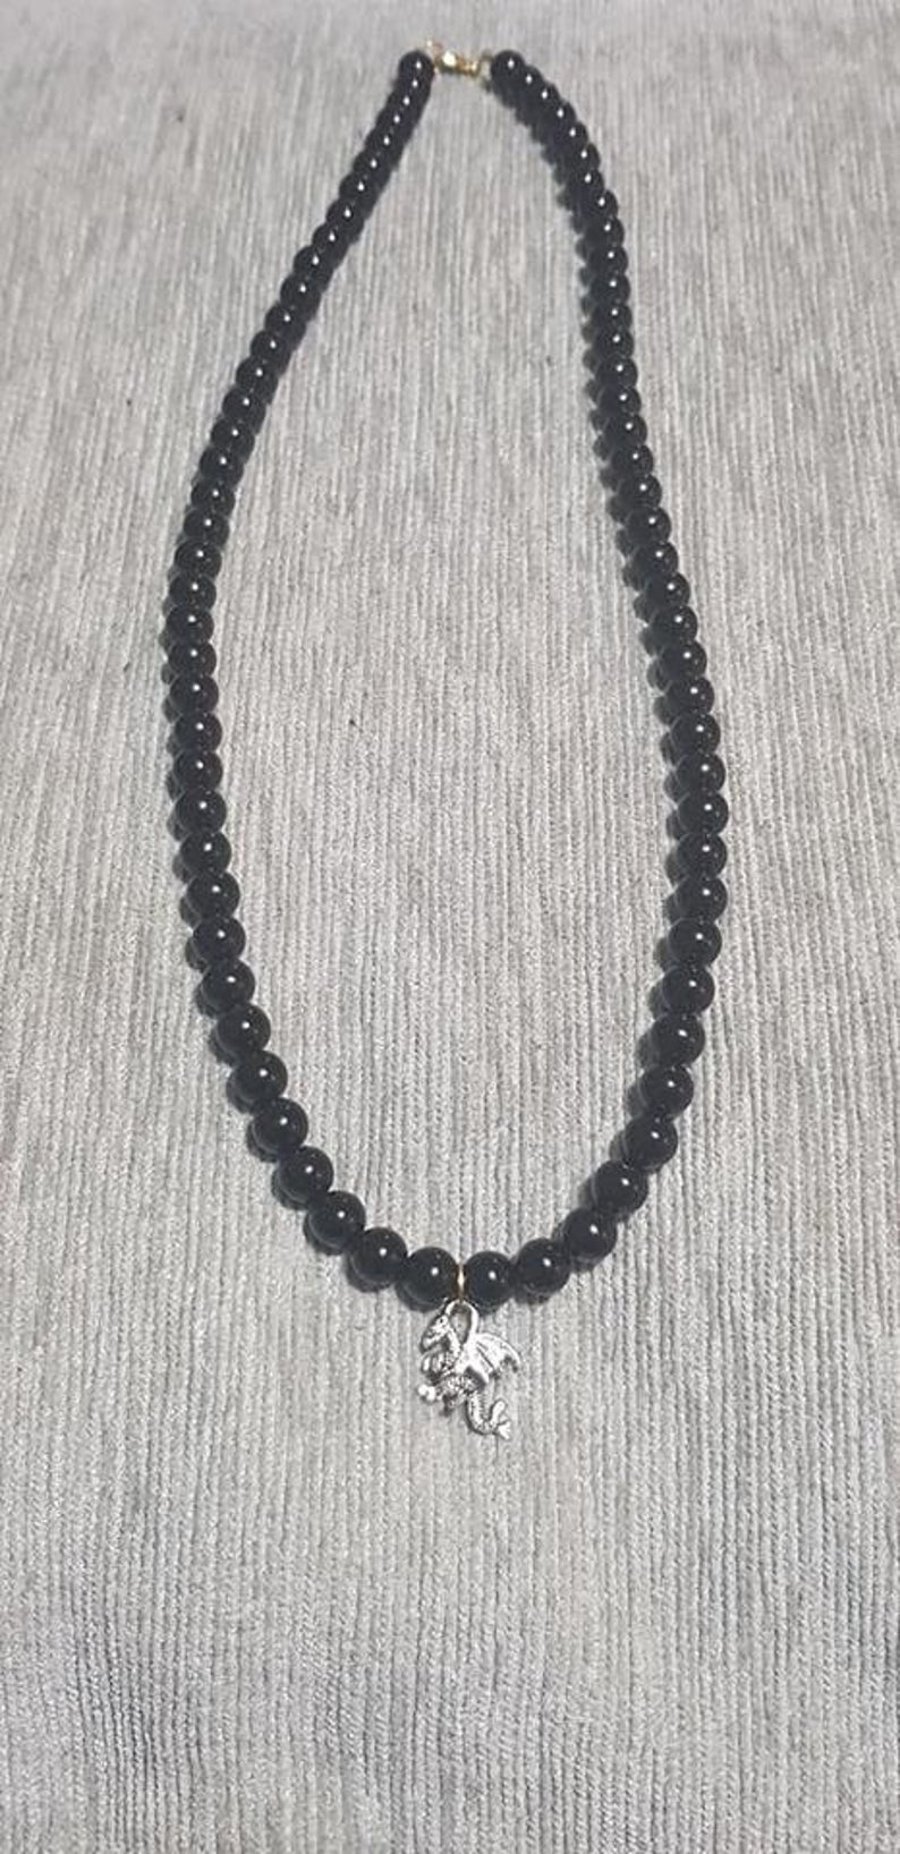 Natural Grade A Black Agate Necklace with Dragon Pendant for Men